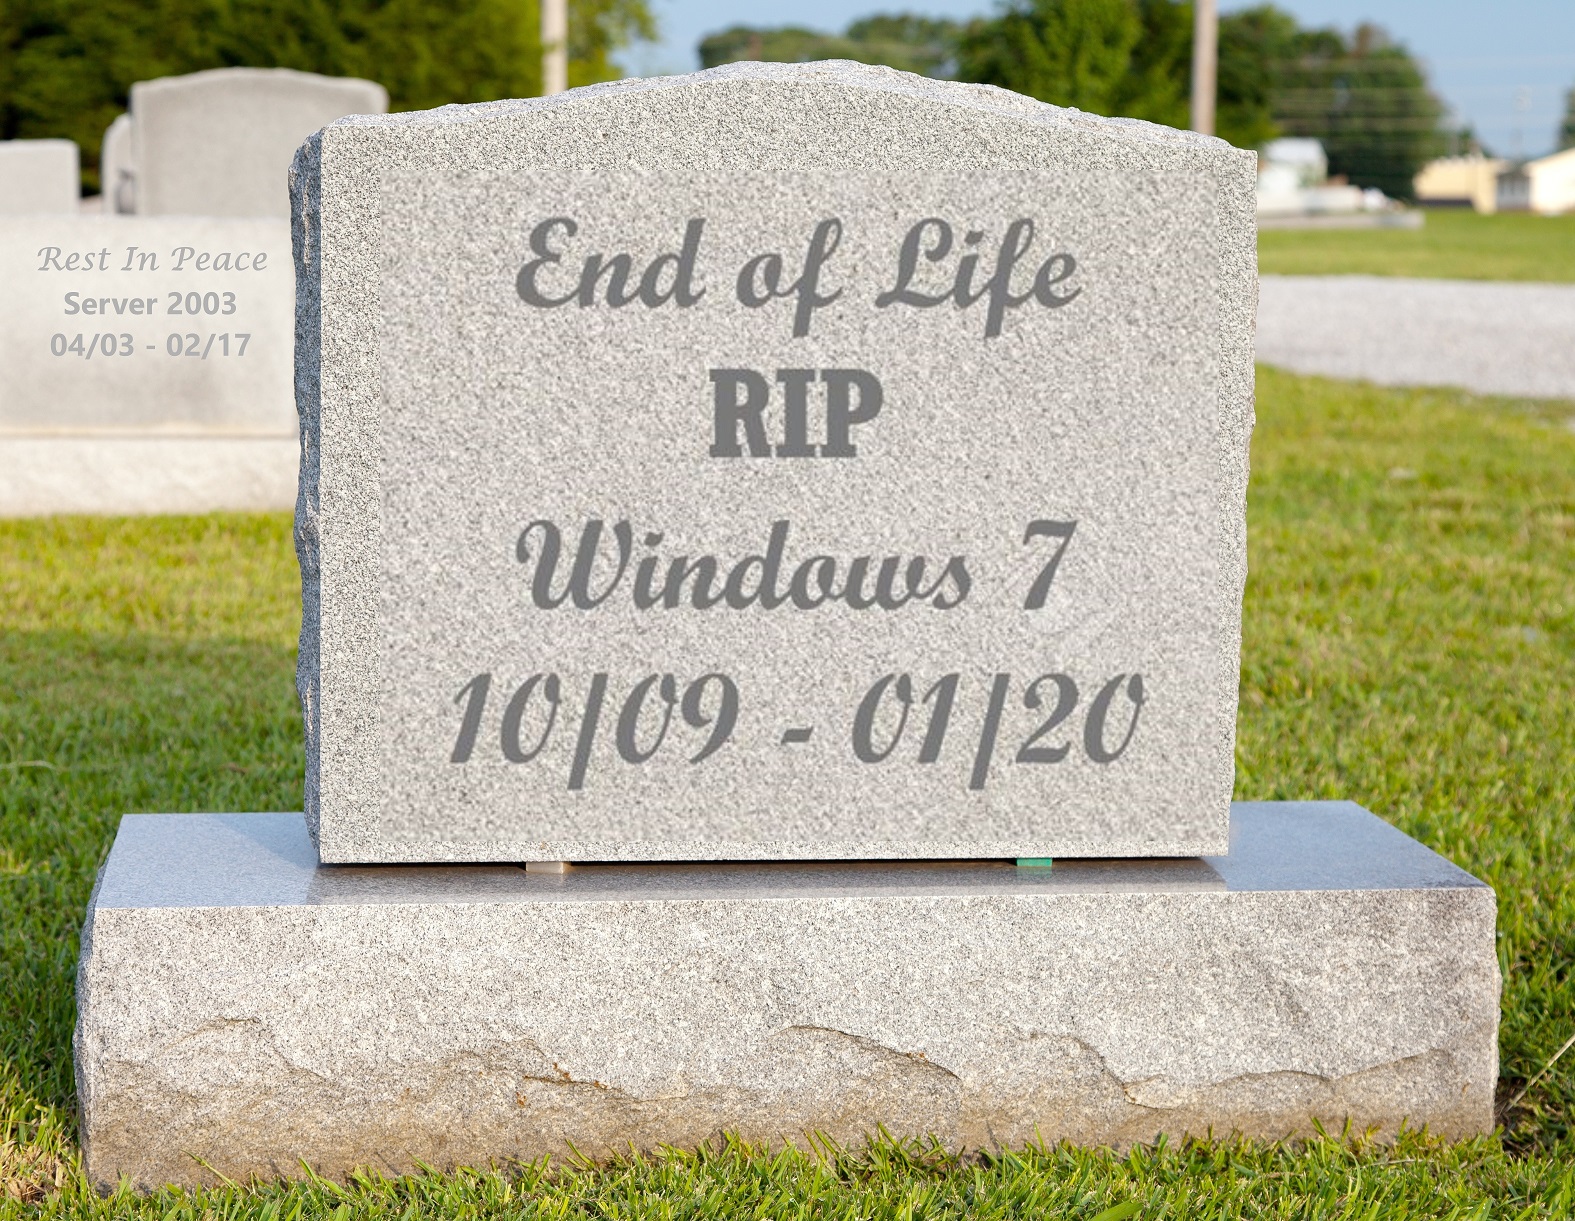 You are currently viewing Windows 7 End of Life is This Year.